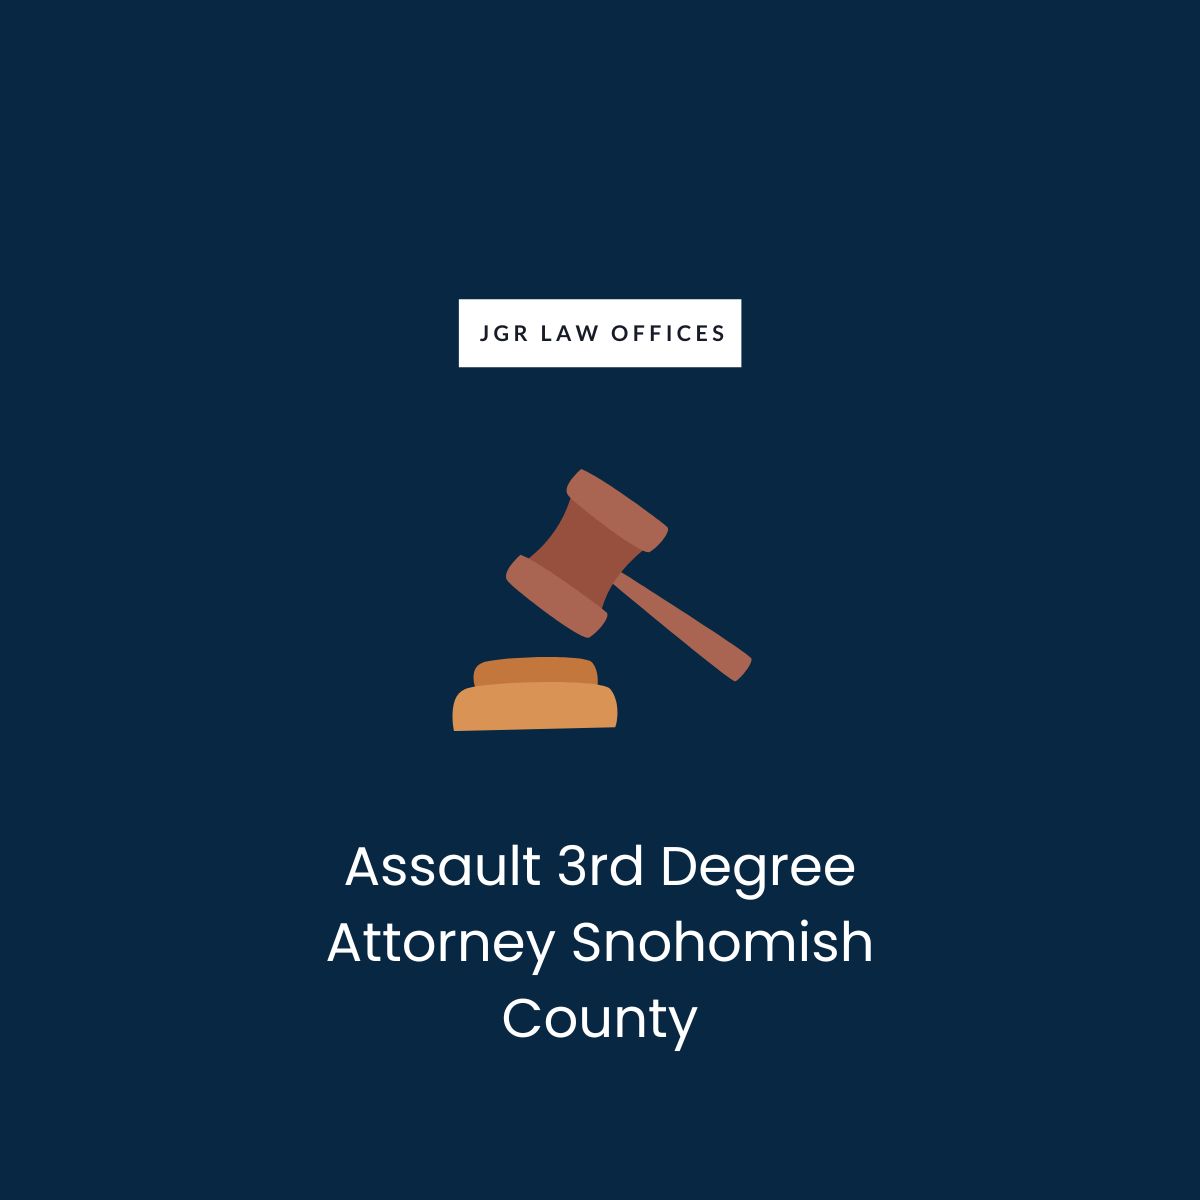 Assault 3rd Degree Attorney Snohomish County